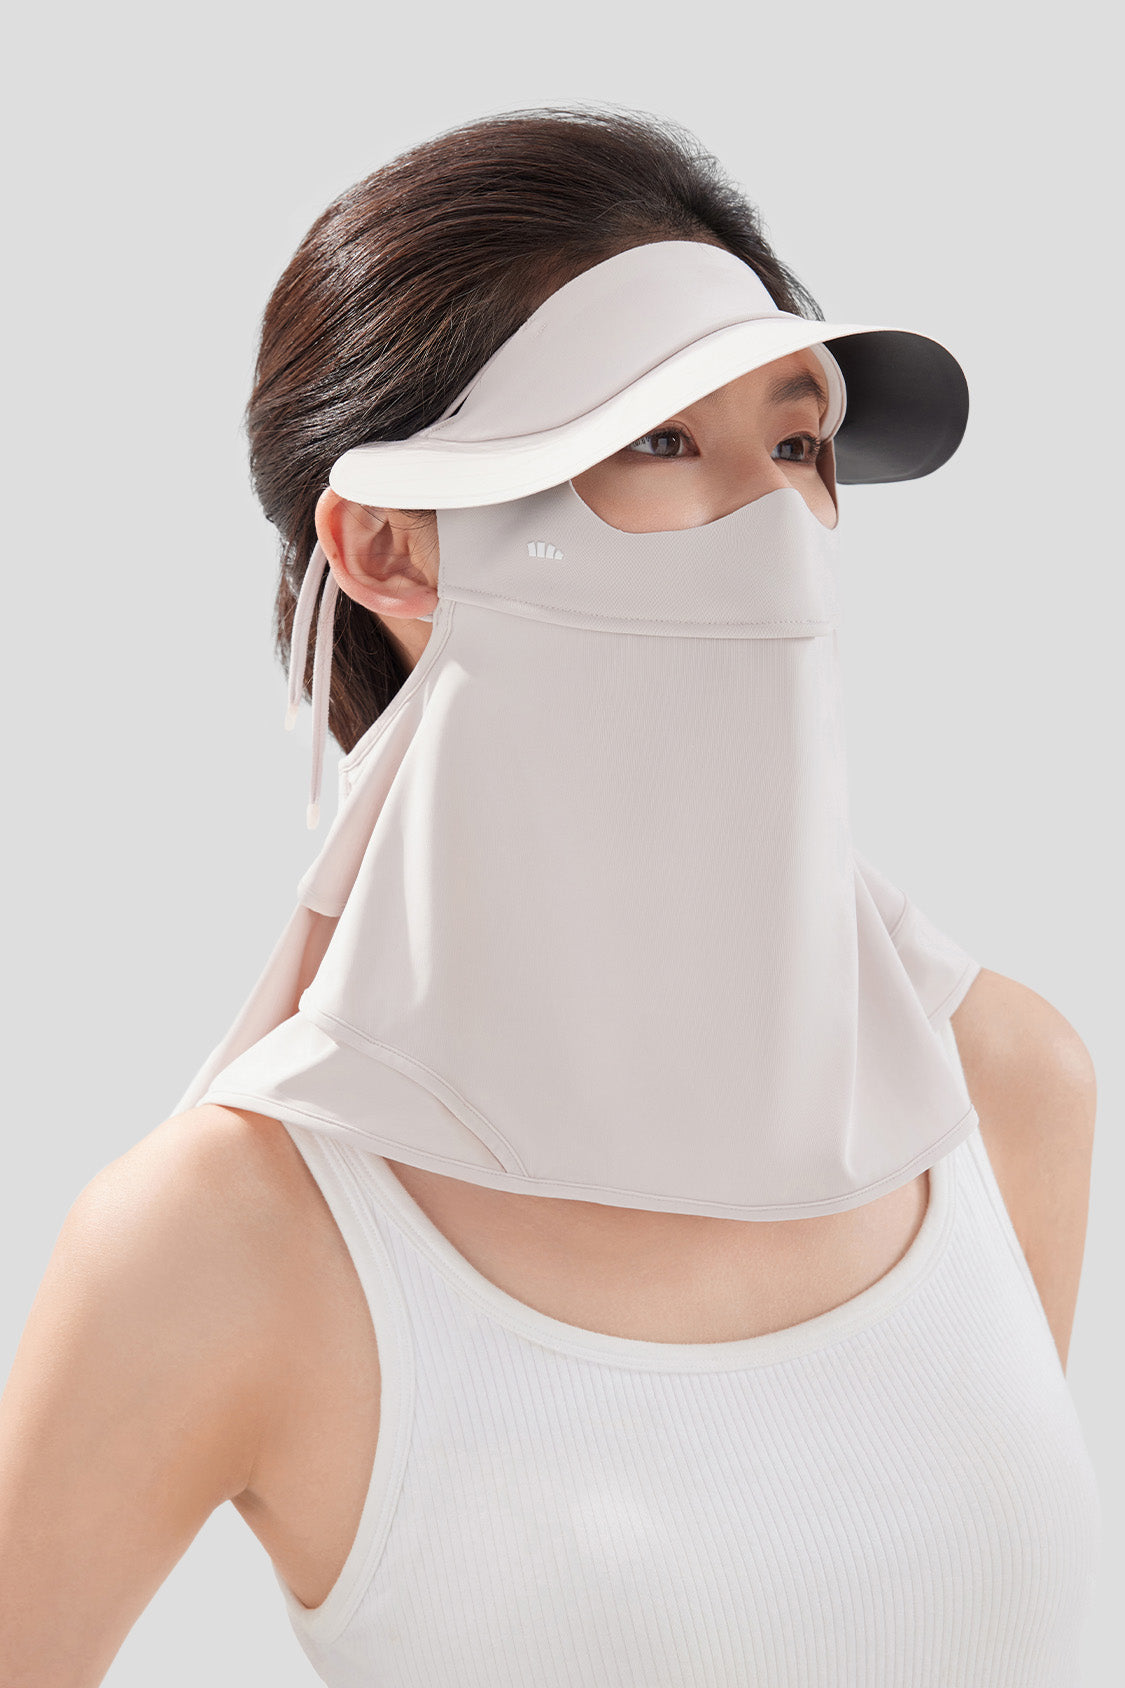 UPF 50 Sun Protection Neck Gaiter Cool, Breathable & Lightweight